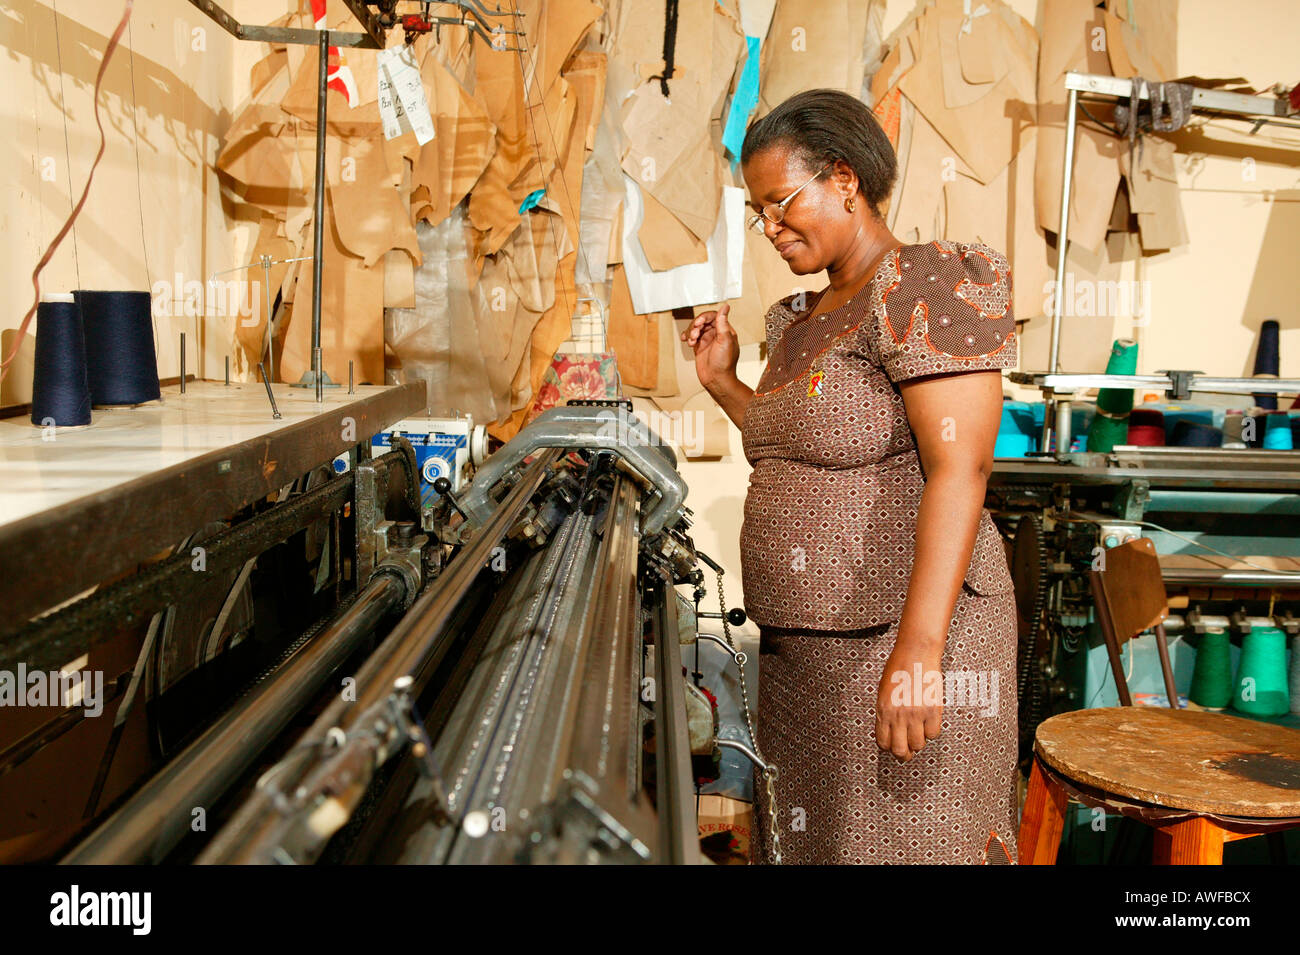 Women in a dress at a tailor's shop, HIV/AIDS aid organization, Gaborone, Botswana, Africa Stock Photo